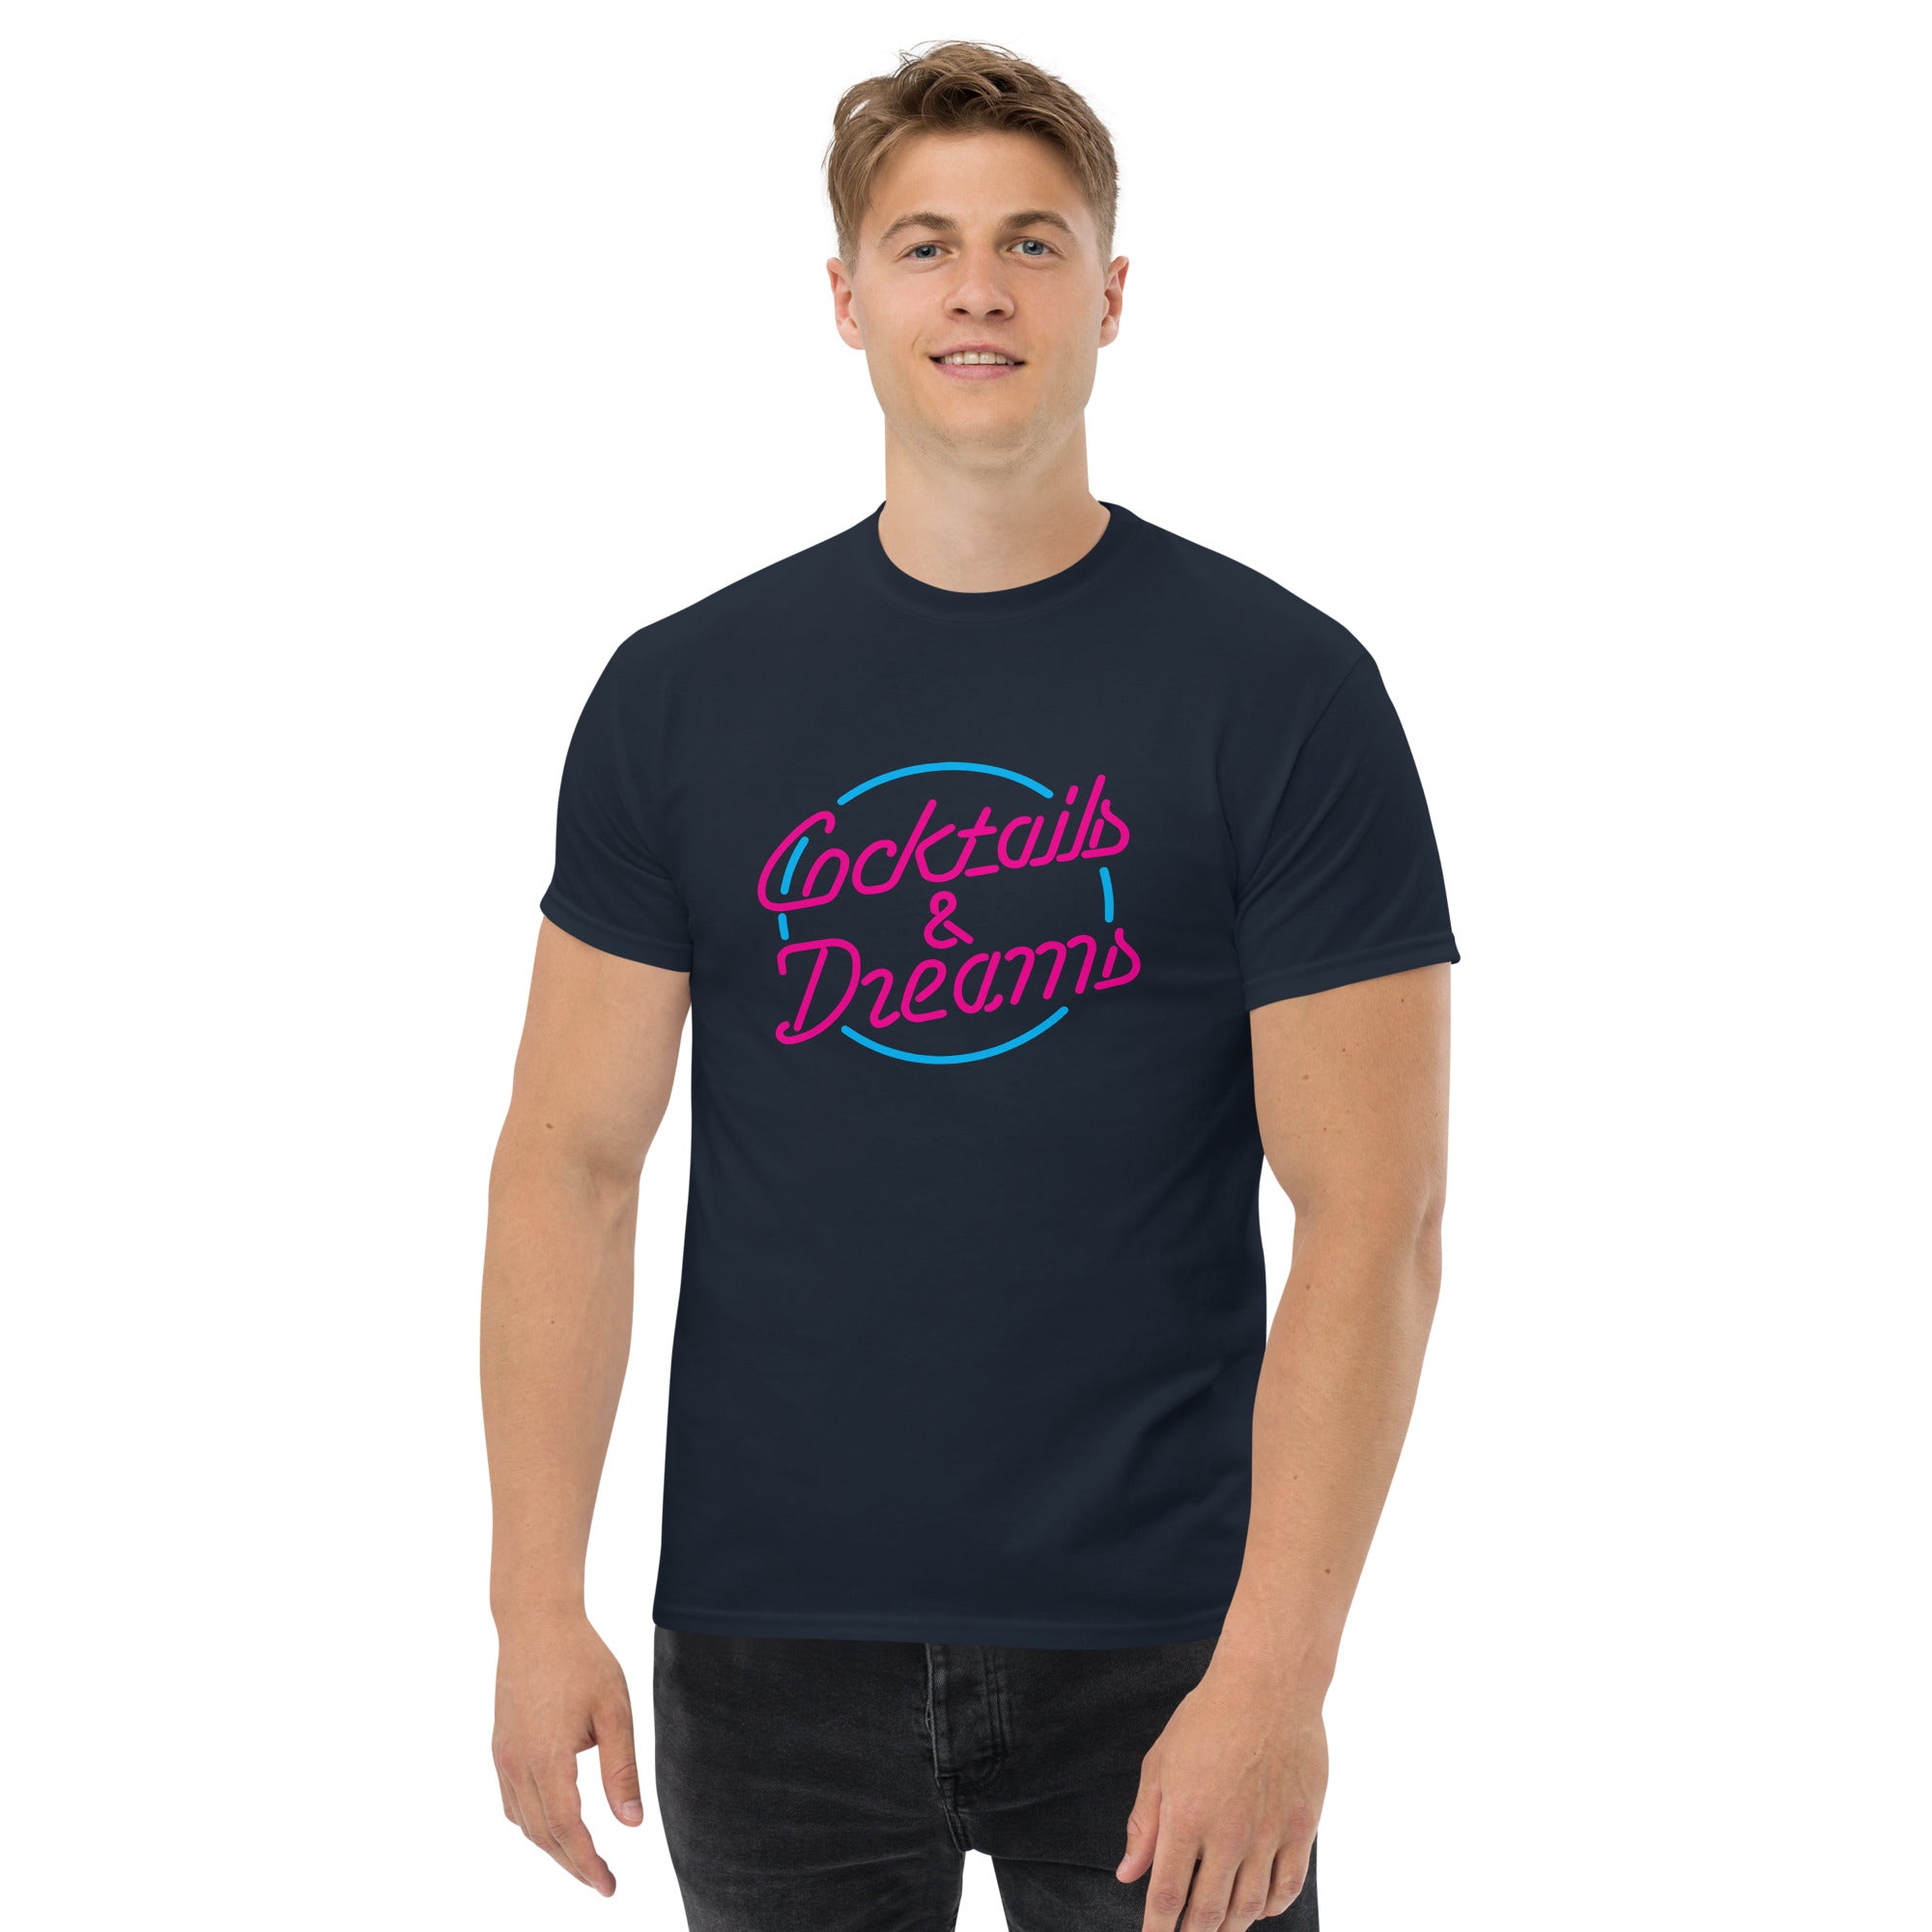 Cocktails and Dreams Shirt